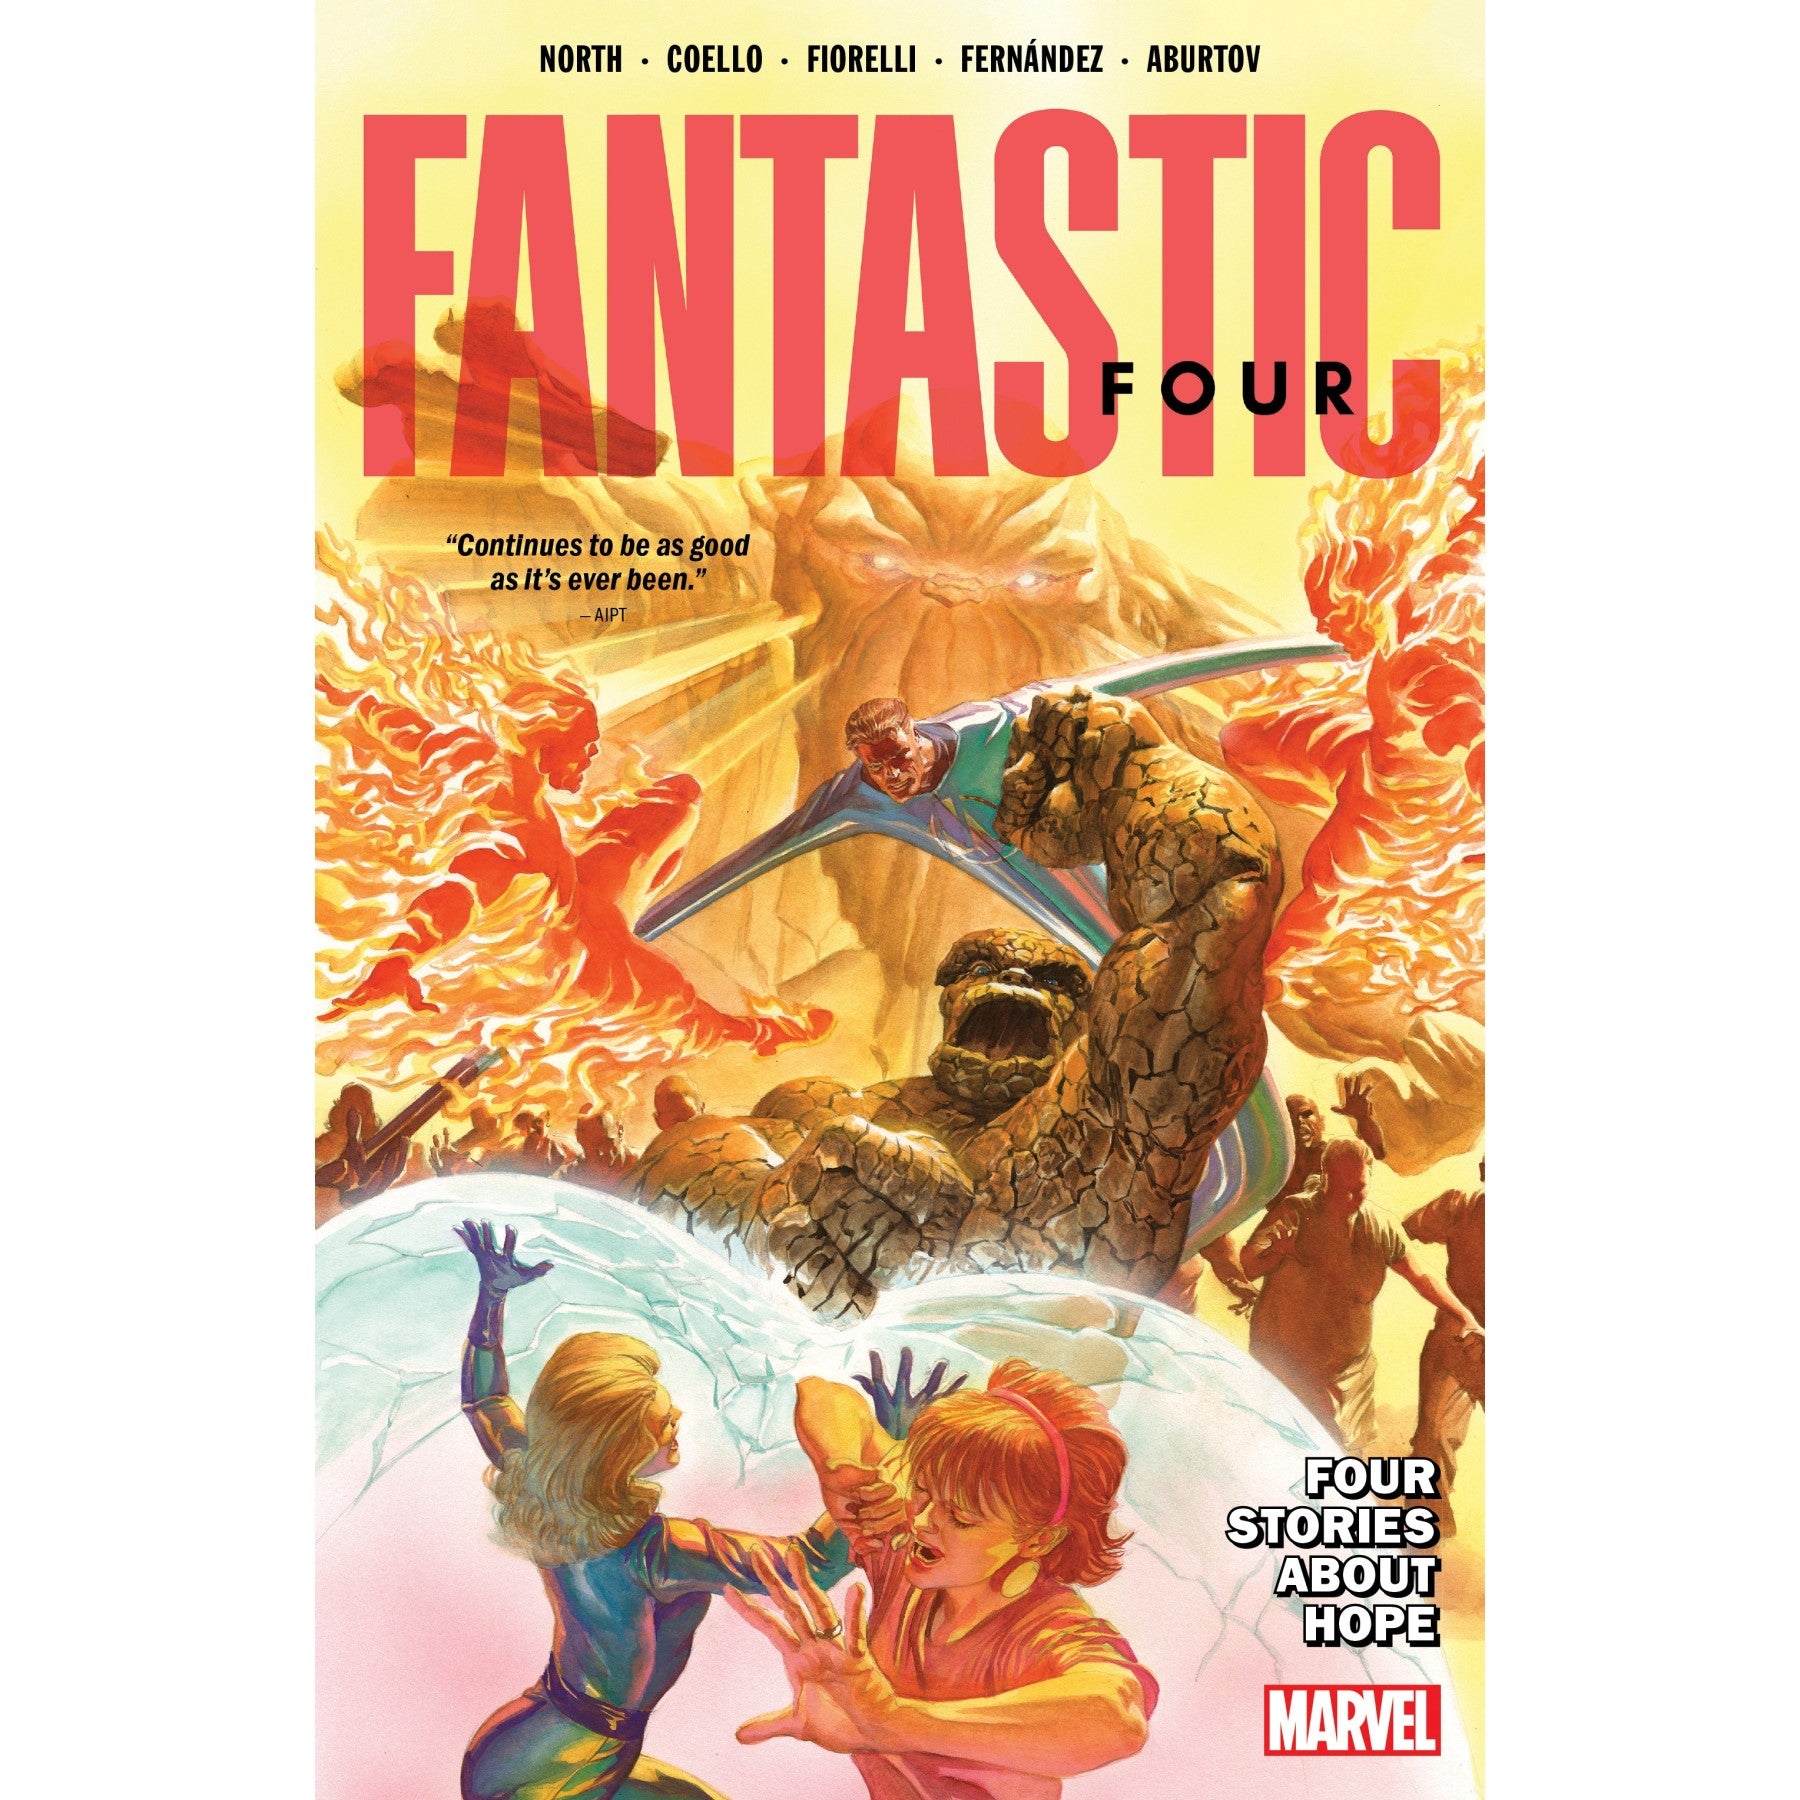 Fantastic Four By Ryan North Vol. 2 Four Stories About Hope